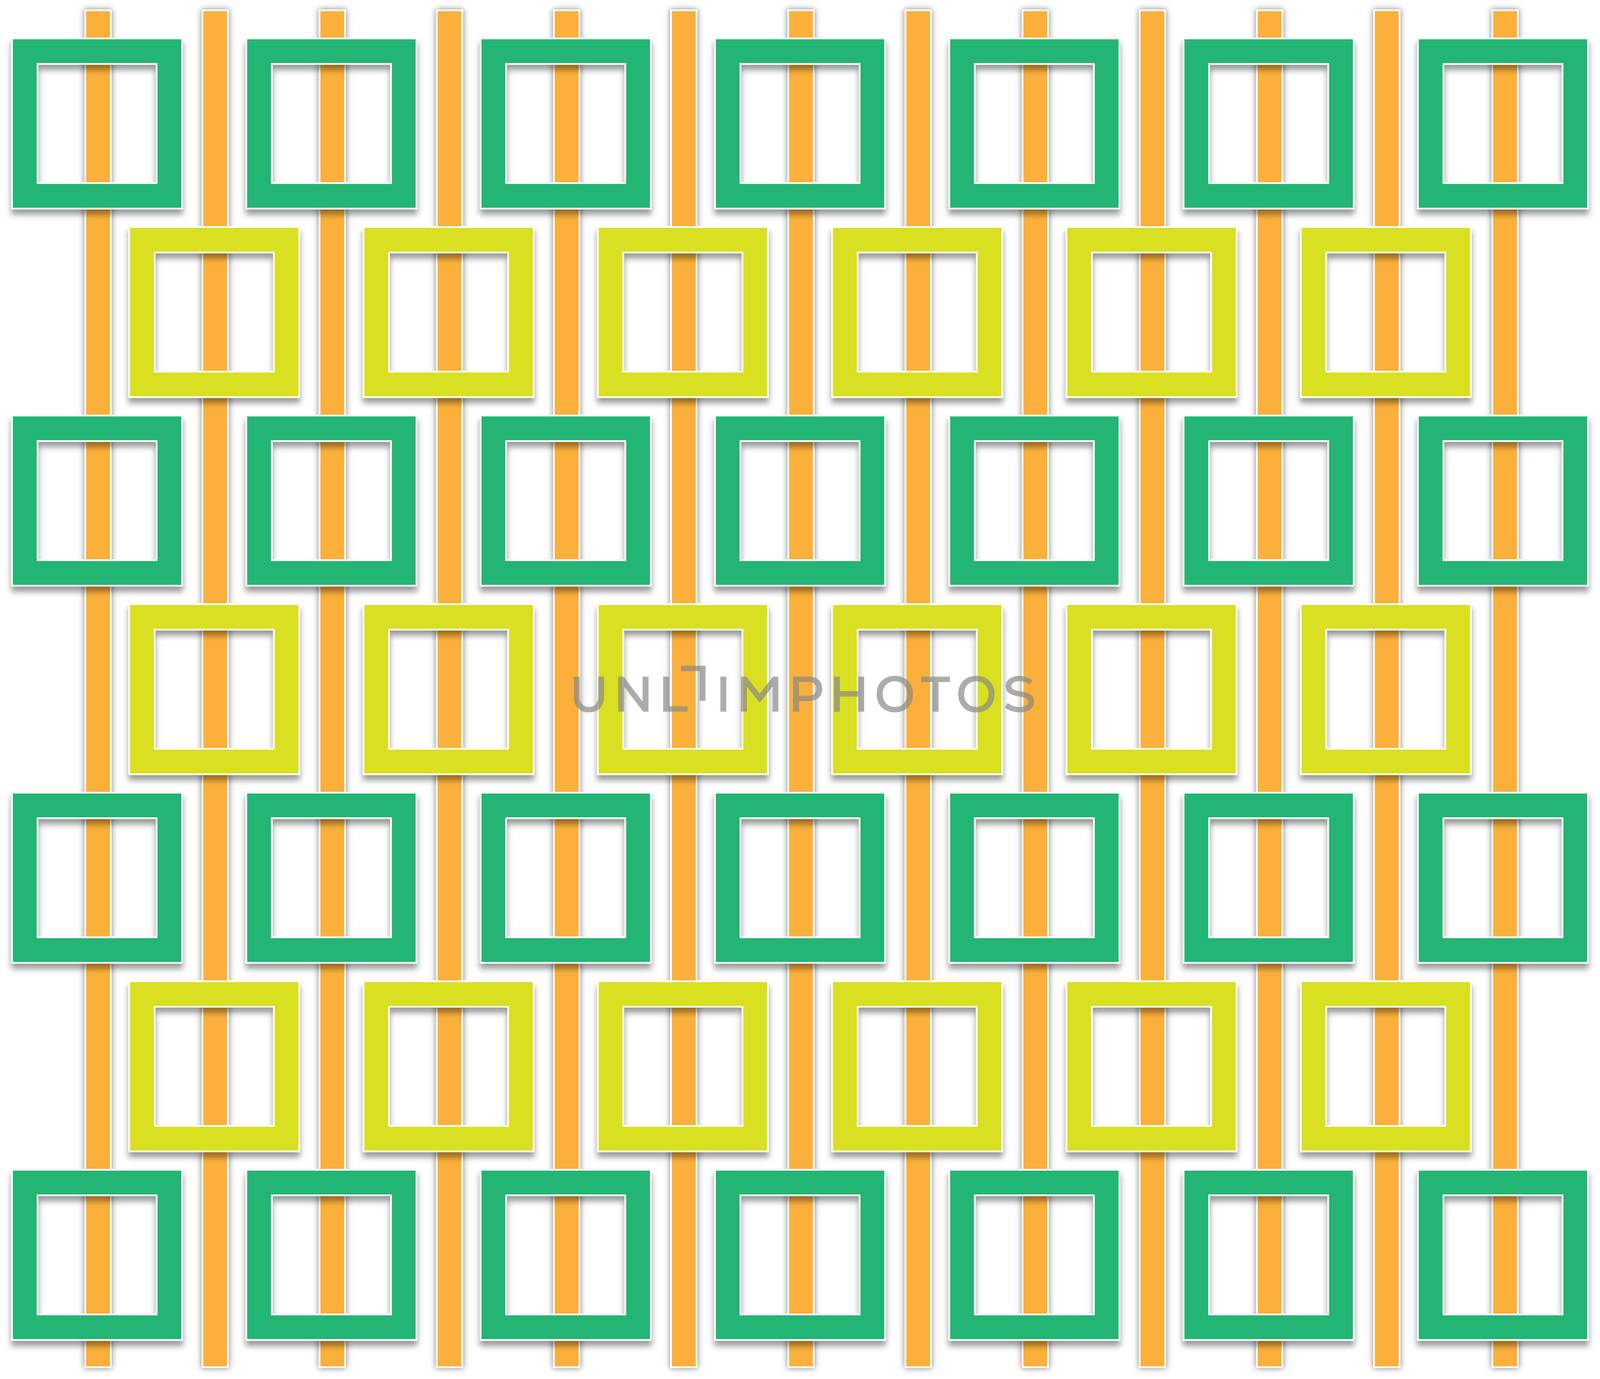 Abstract pattern of orange and green squares regularly distributed over the area